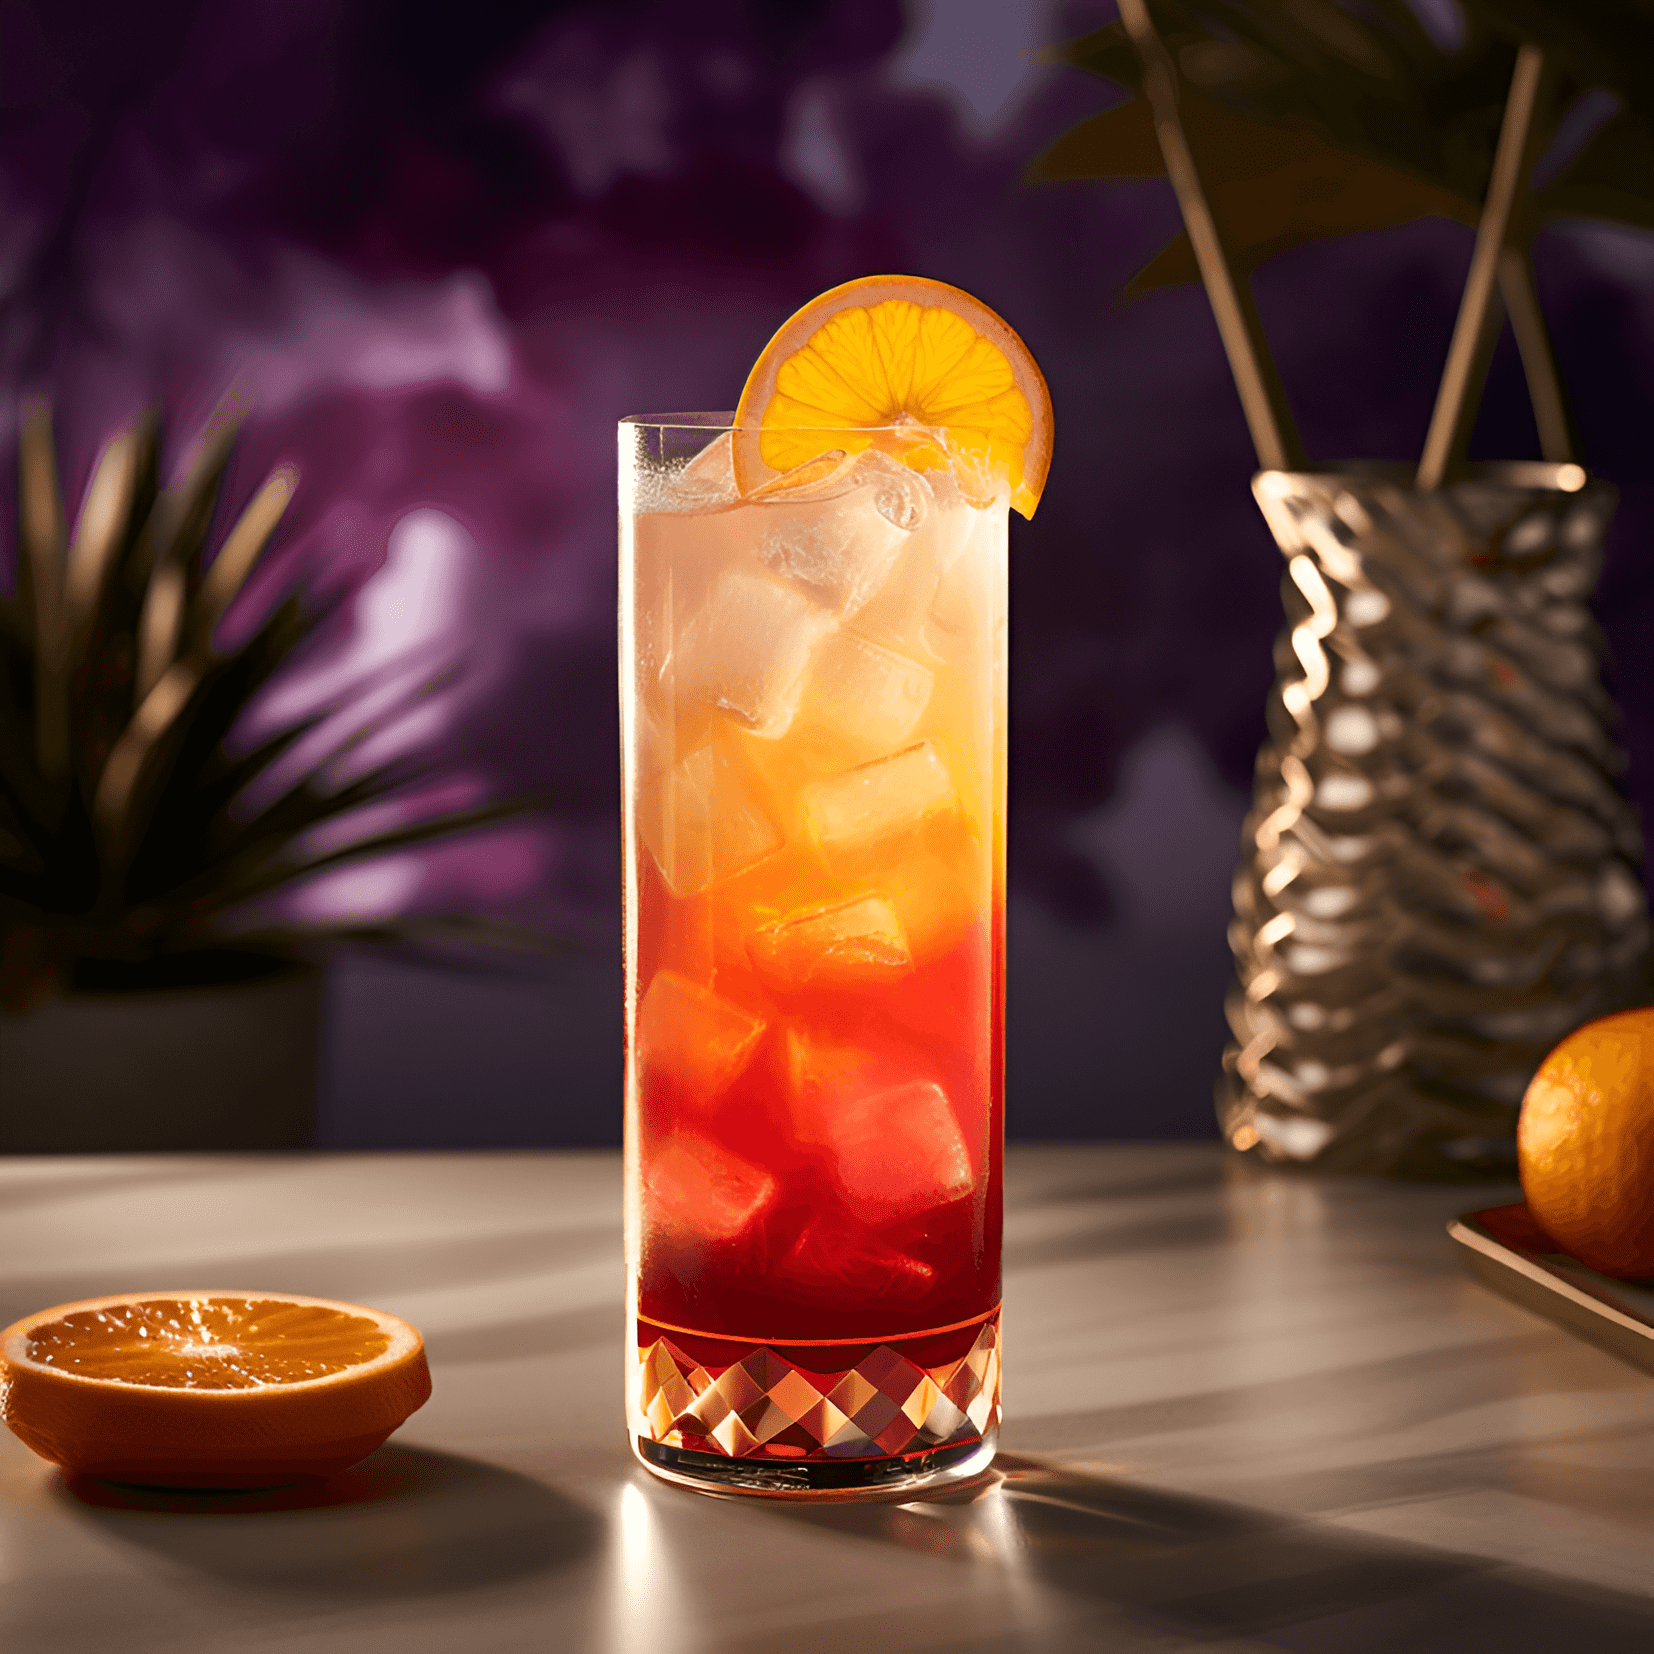 Sunrise Cocktail Recipe - The Sunrise cocktail has a sweet and tangy taste, with a hint of tequila. It is fruity, refreshing, and slightly sour, making it perfect for warm weather and outdoor events.